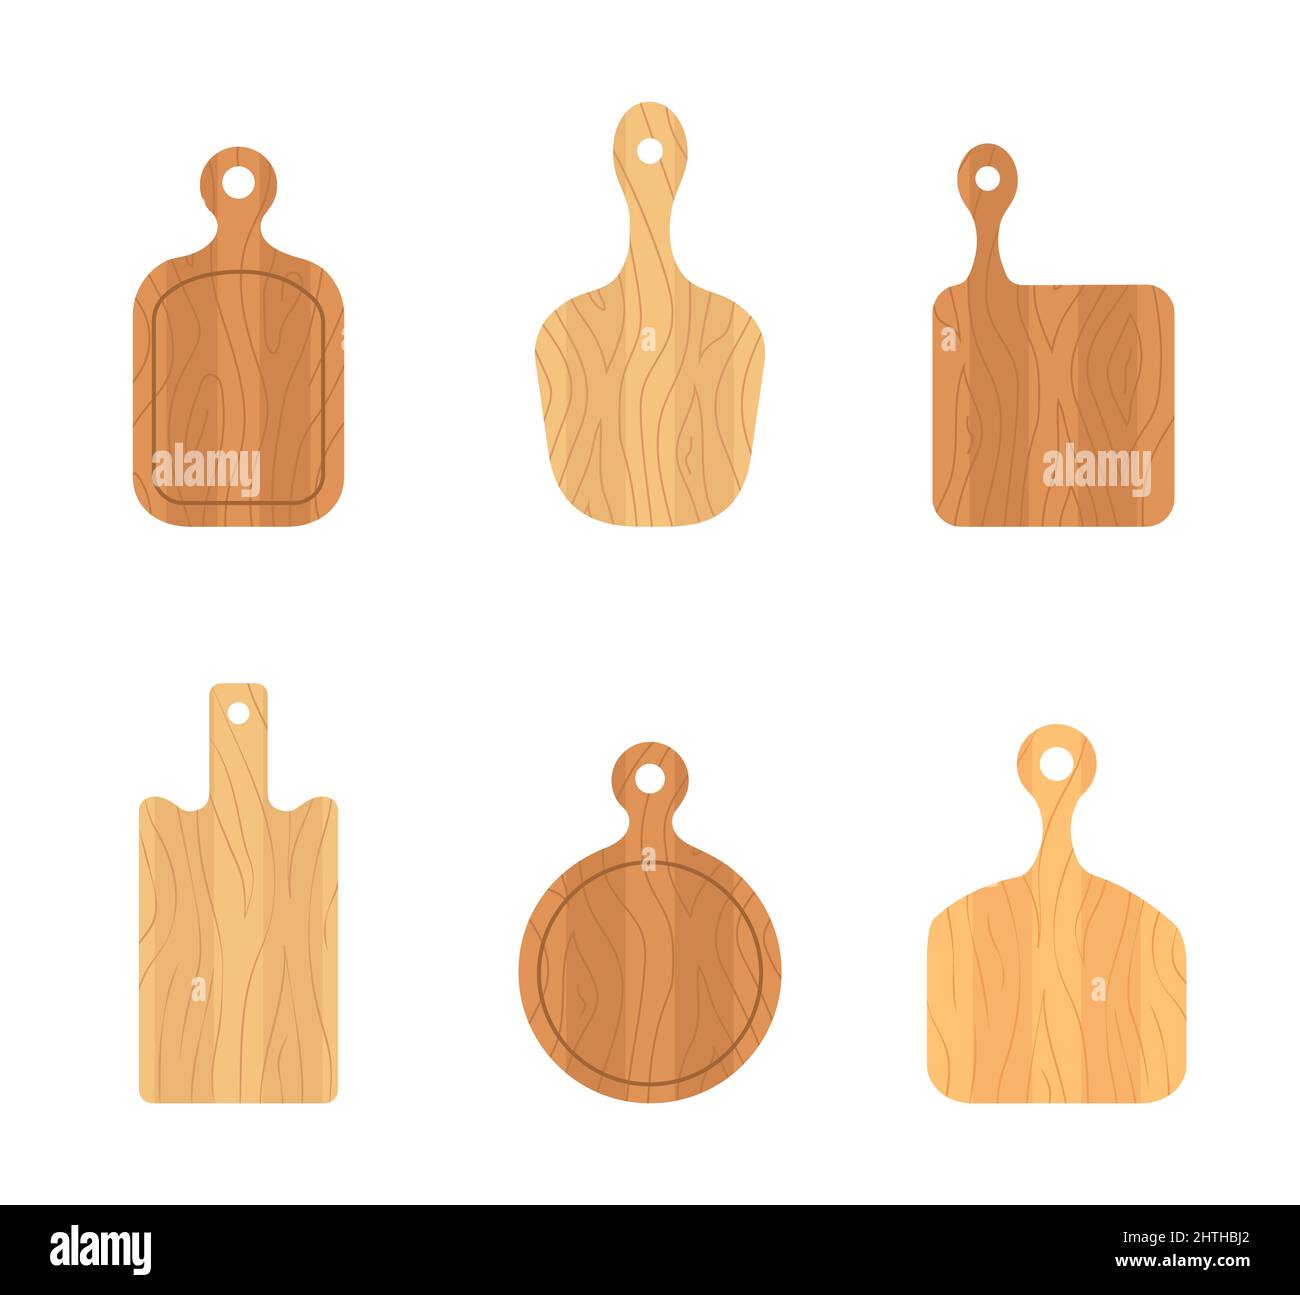 Set of wooden cutting boards. Kitchen tools of various shapes. Top view. Vector illustration in flat cartoon style Stock Vector